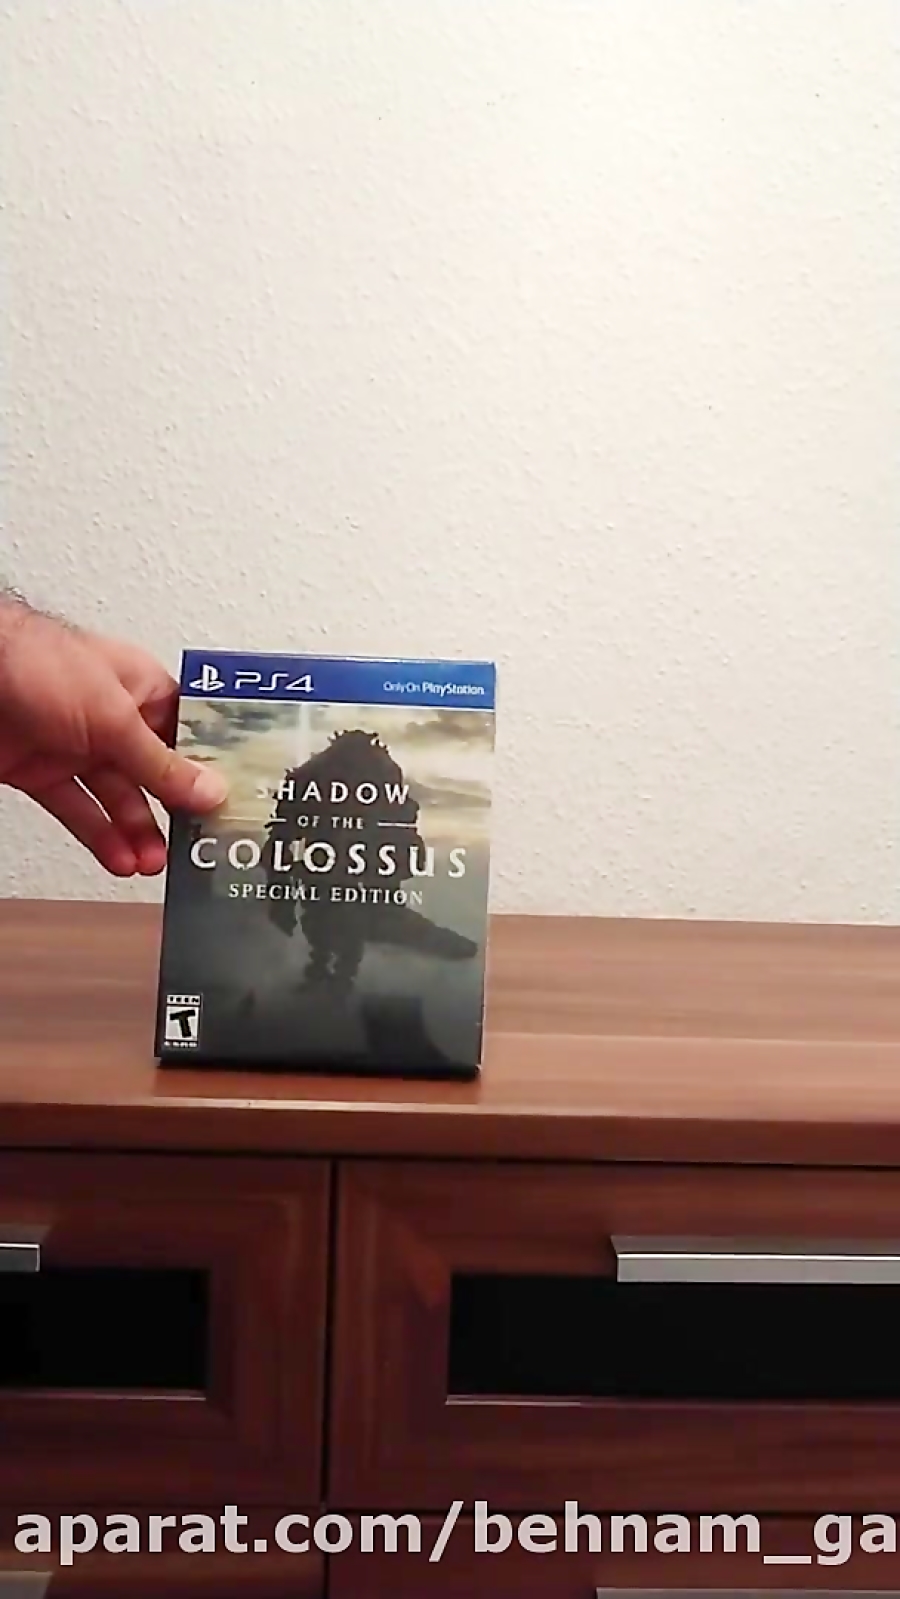 Shadow of The colossus Special Edition Unboxing